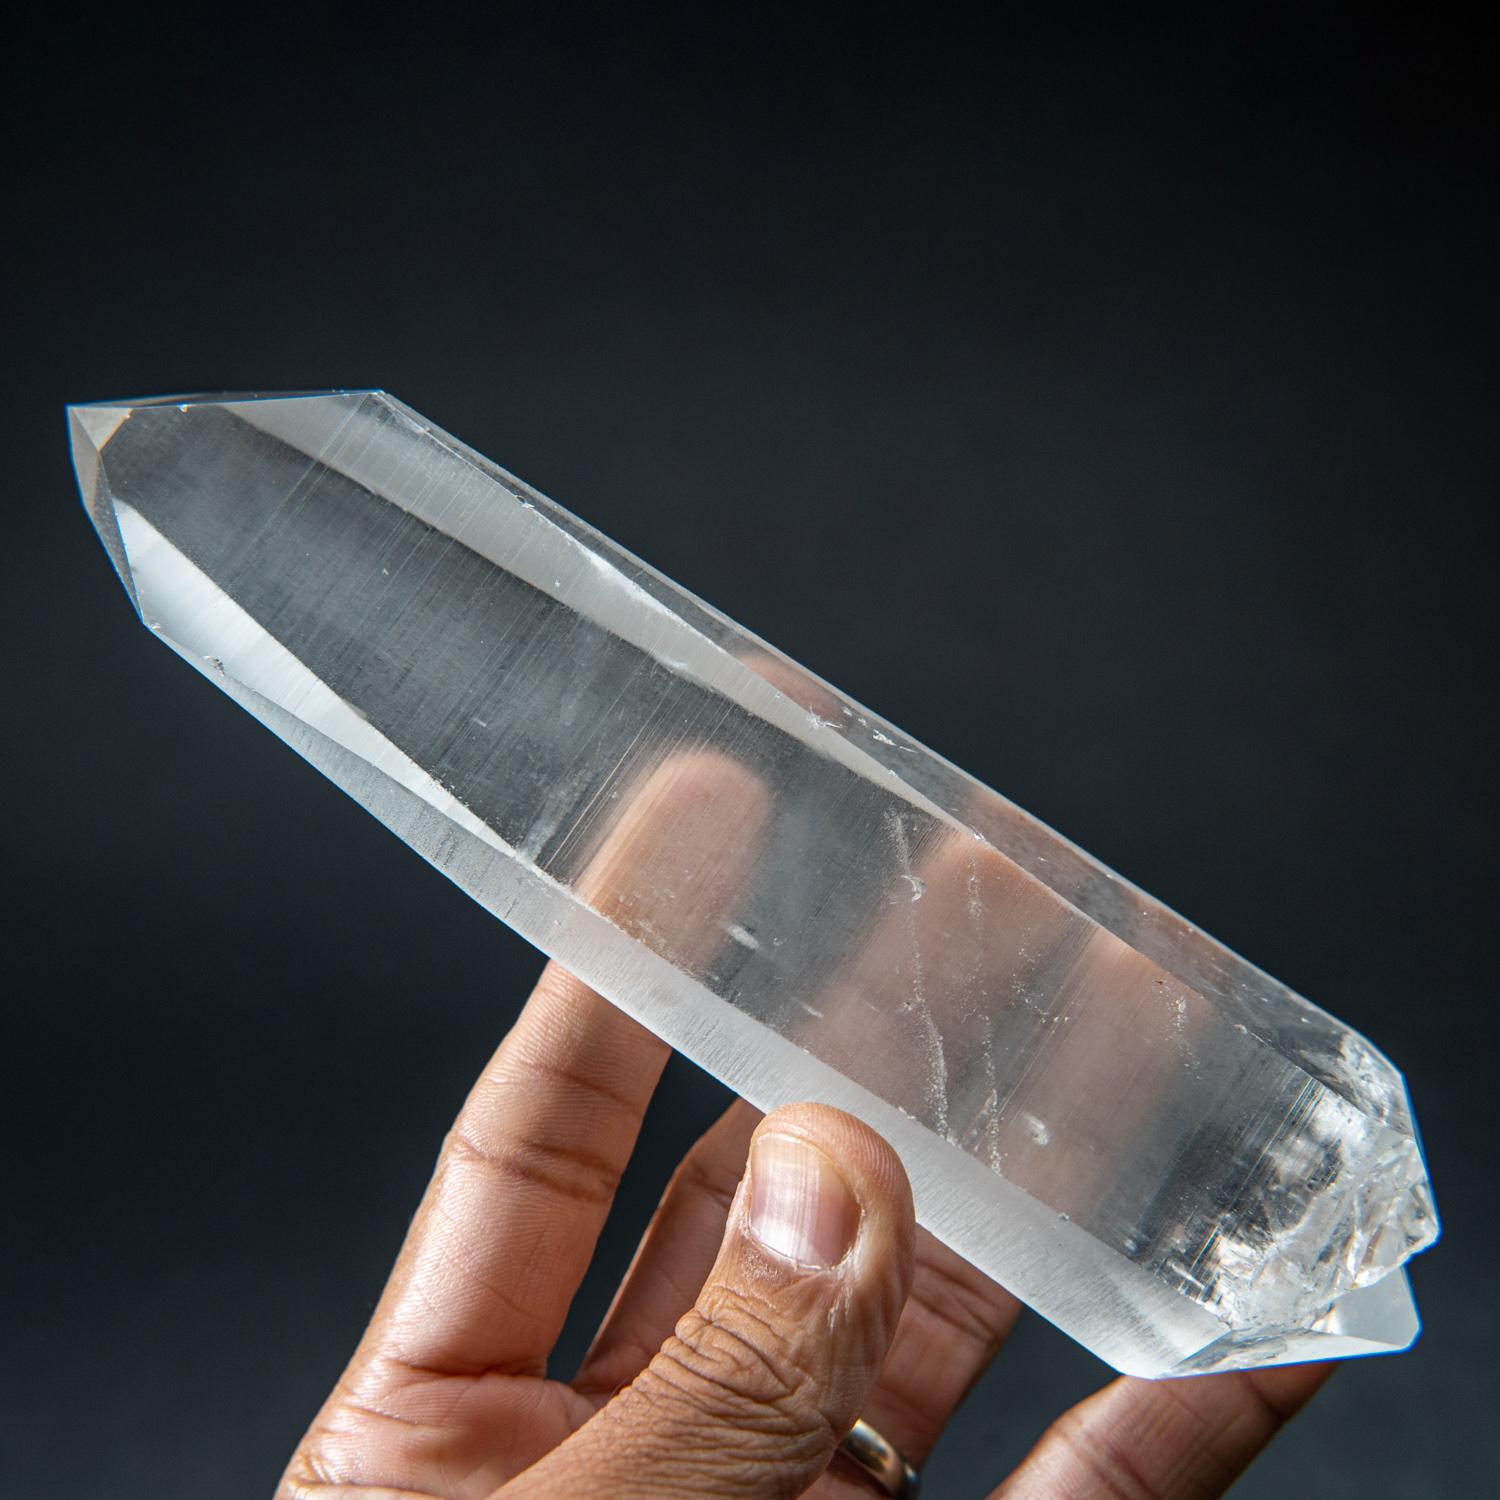 This museum-quality Brazilian Lemurian Quartz Crystal is a remarkable double terminated floater single crystal. Water clear and perfectly terminated on both ends, this crystal is all natural and unpolished. Unparalleled in its power, Lemurian Quartz